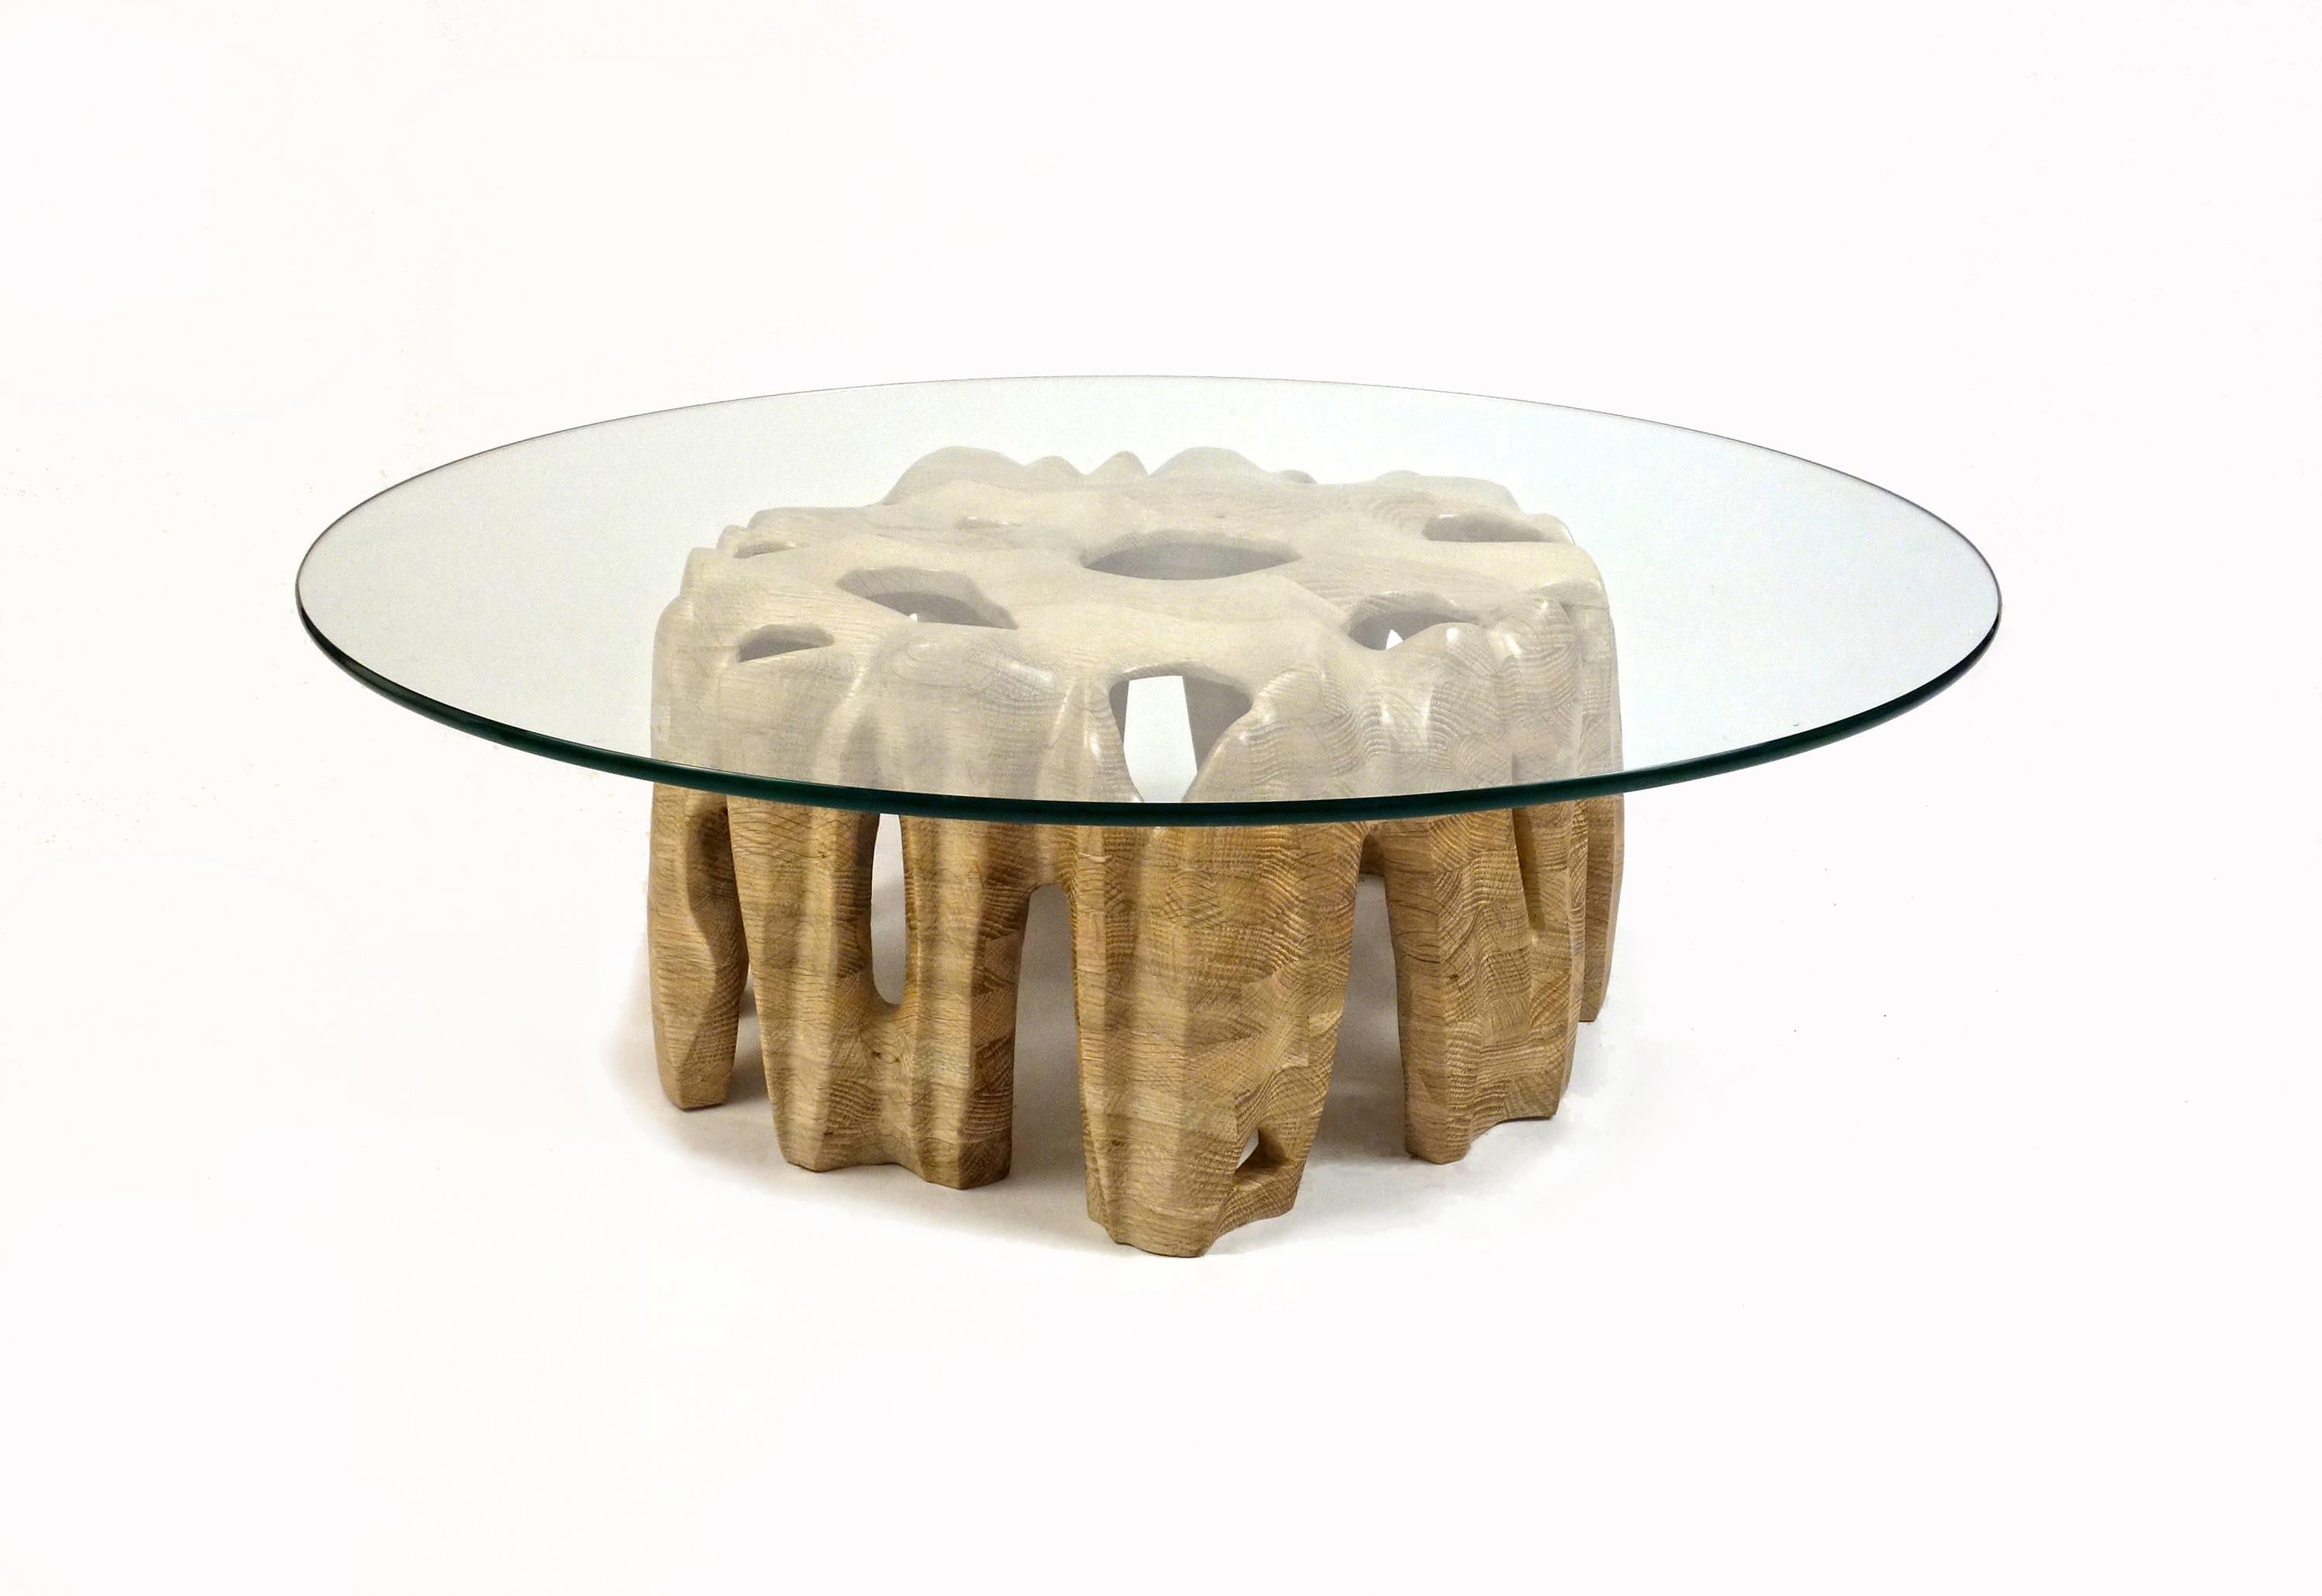 Erode Coffee Table by Aaron Scott
Dimensions: Ø 91.5 x H 30.5 cm
Materials: White oak and glass.

Hand-sculpted, solid wood coffee table with glass top, whose wood base simulates the eroded sides of a mountain. 

For all pieces in this series,